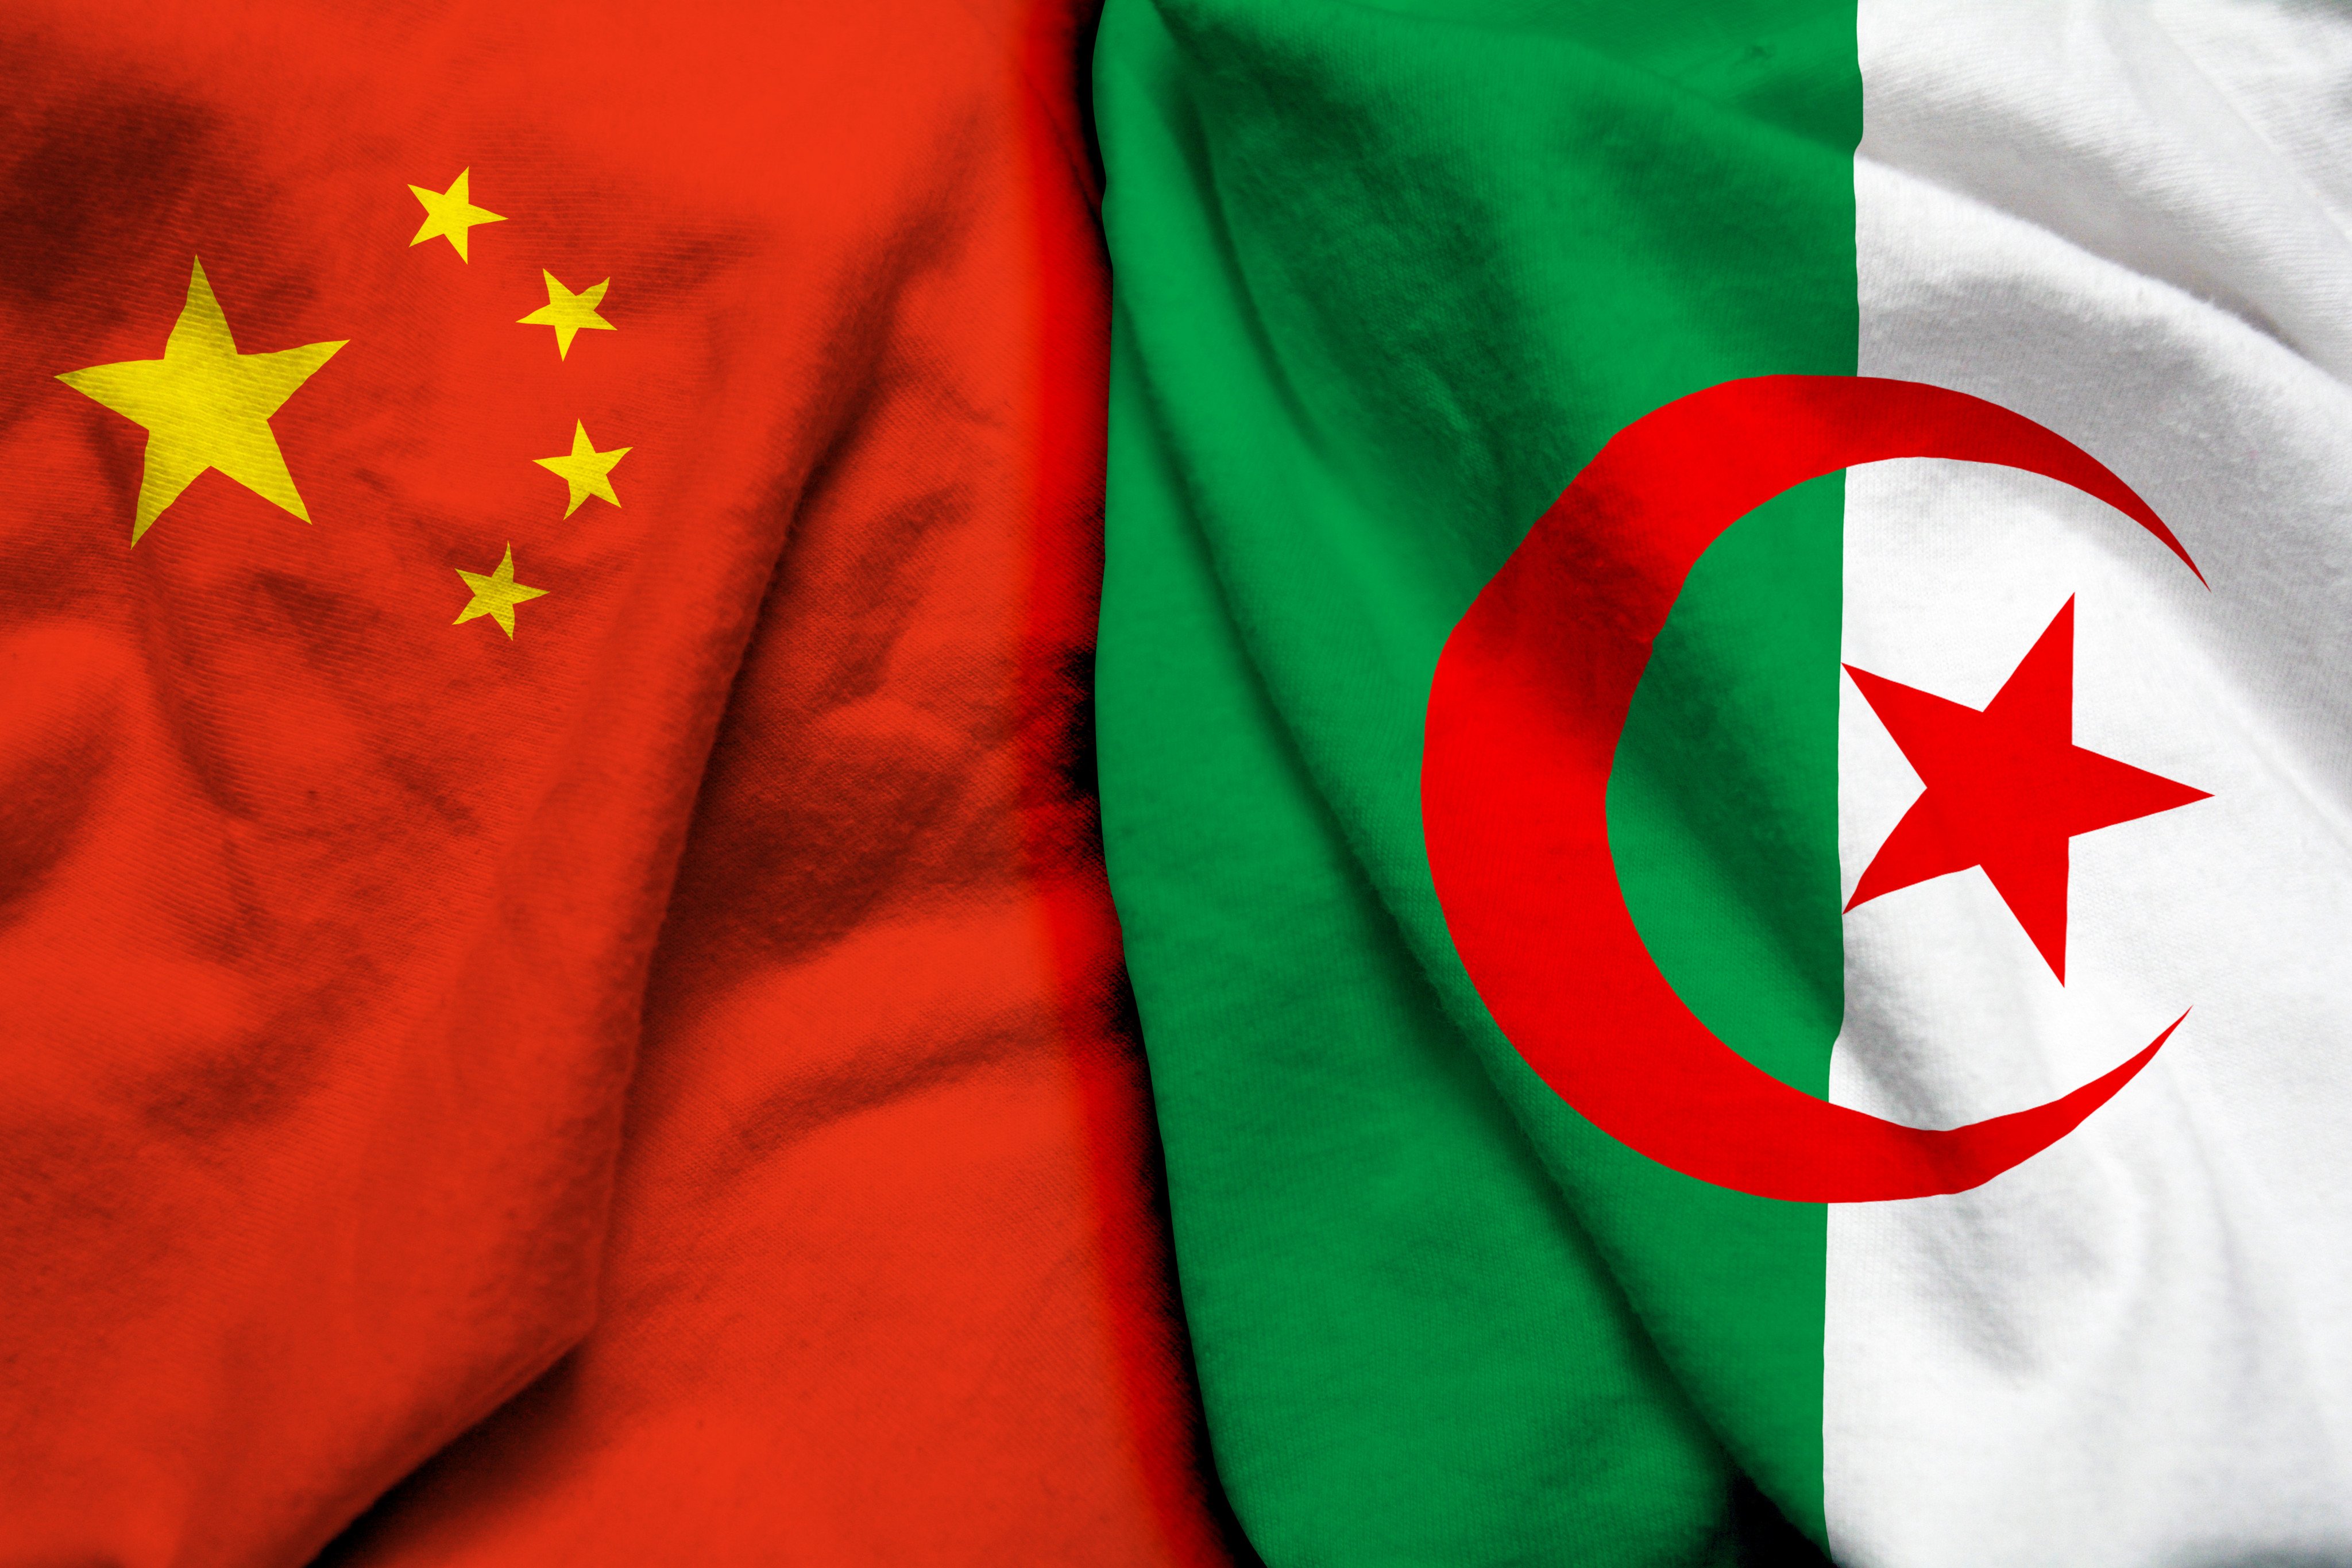 China and Algeria are working together for easier access to a large iron ore deposit in the north African country. Photo: Shutterstock